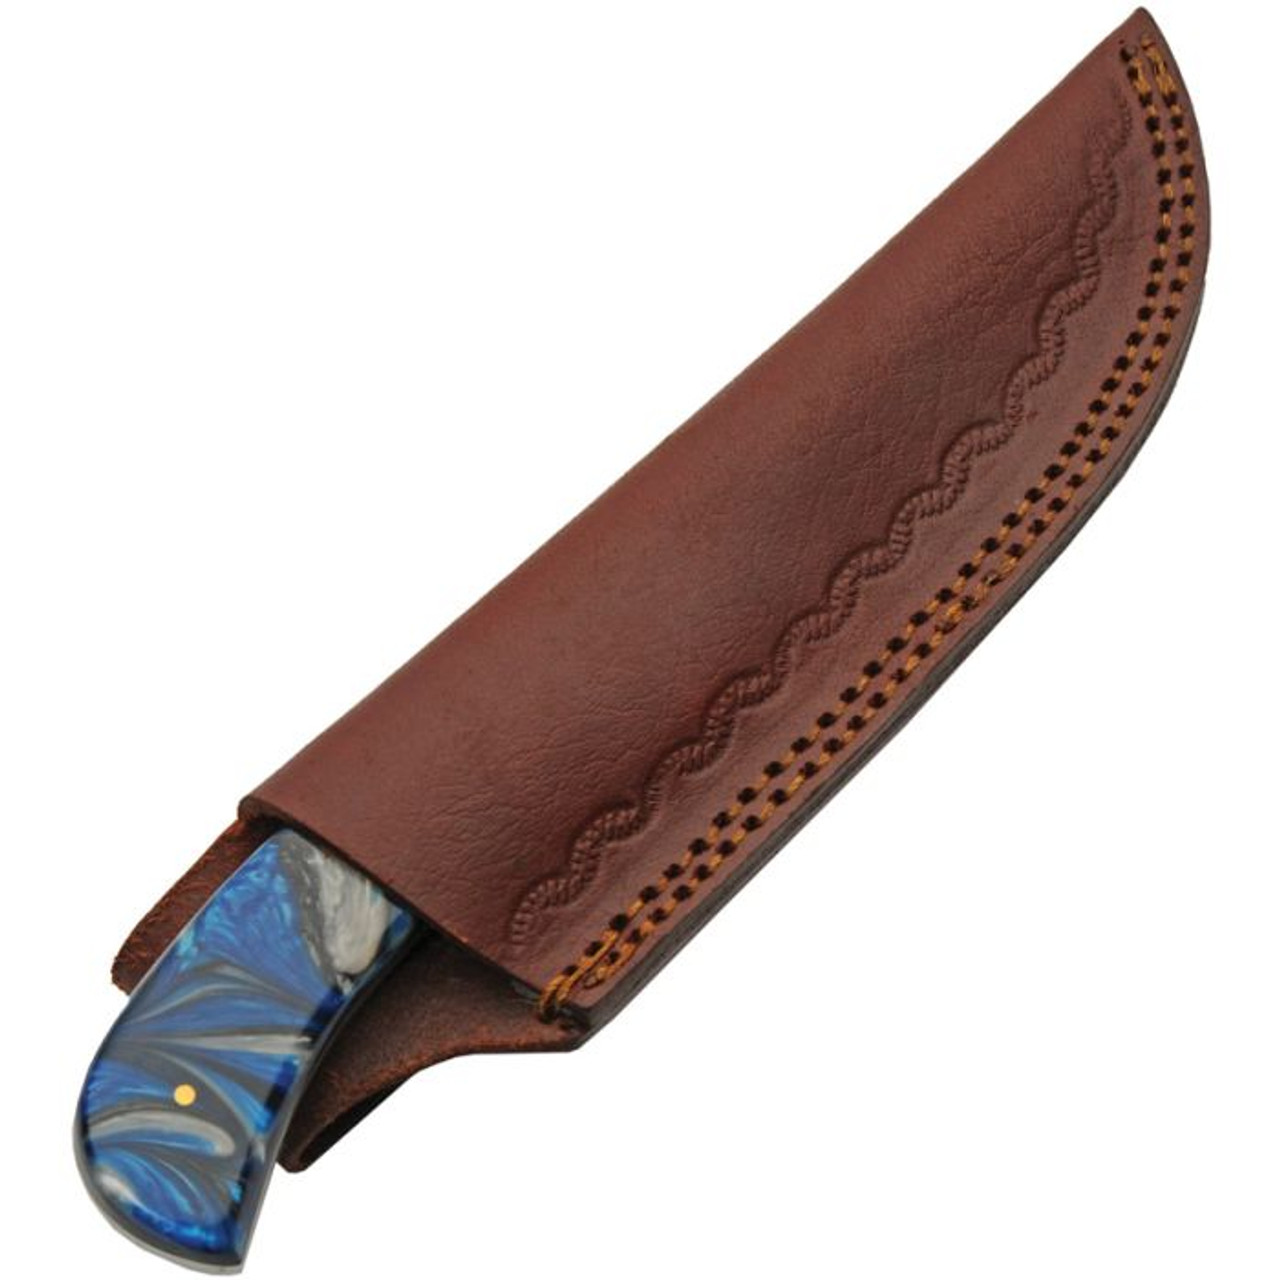 Damascus Knives Sky Blue Hunter (DM1380) 4" Damascus Drop Point Plain Blade, Blue and Black Resin Handle with Stainless Bolsters, Brown Leather Belt Sheath